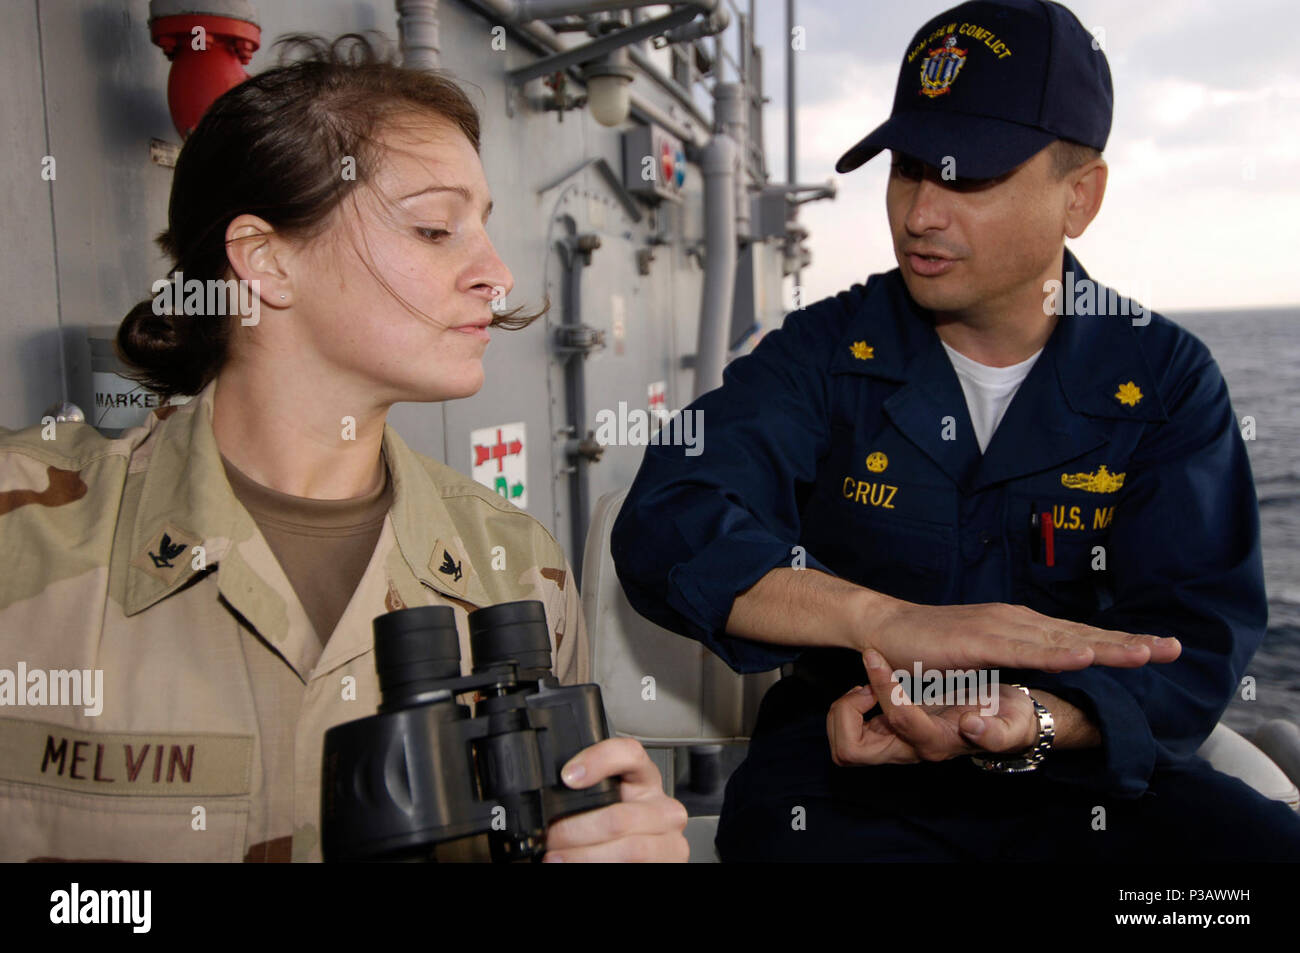 Gulf (Dec. 2, 2006)- USS Ardent (MCM 12) Commanding Officer Lt. Cmdr. Angel Cruz speaks to Mass Communication Specialist 3rd Class Kori Melvin on Officer of the Deck procedures during a mine countermeasure exercise. The exercise is being conducted in support of maritime security operations (MSO). MSO help set the conditions for security and stability in the maritime environment as well as complement the counter-terrorism and security efforts of regional nations. U.S. Navy Stock Photo